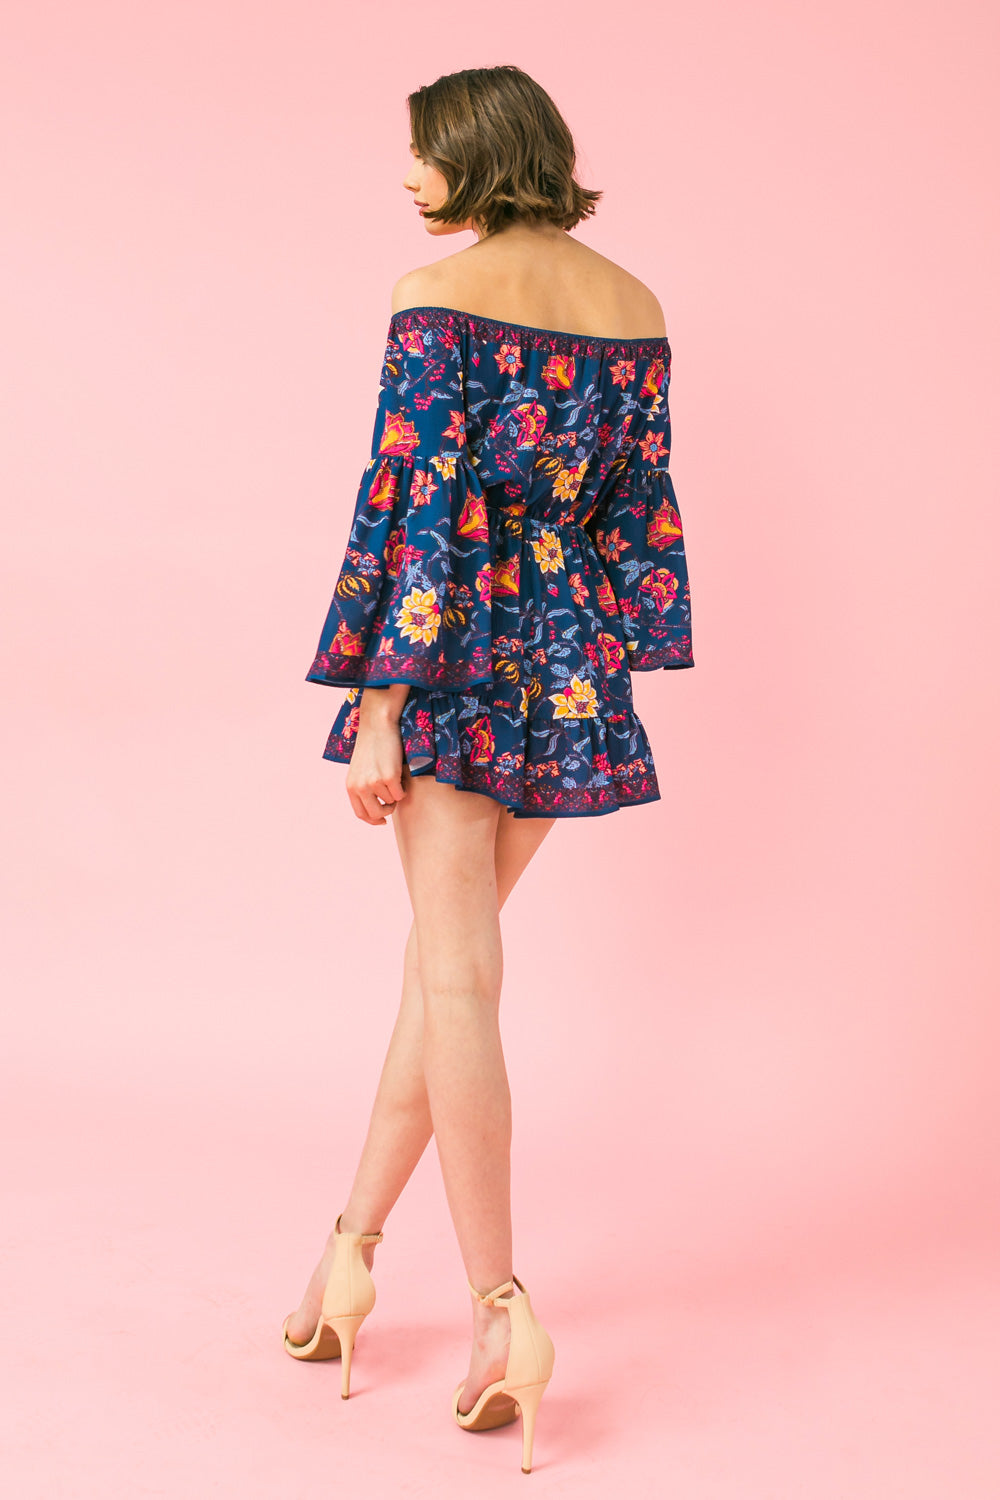 POWER OF LOVE FLORAL ROMPER